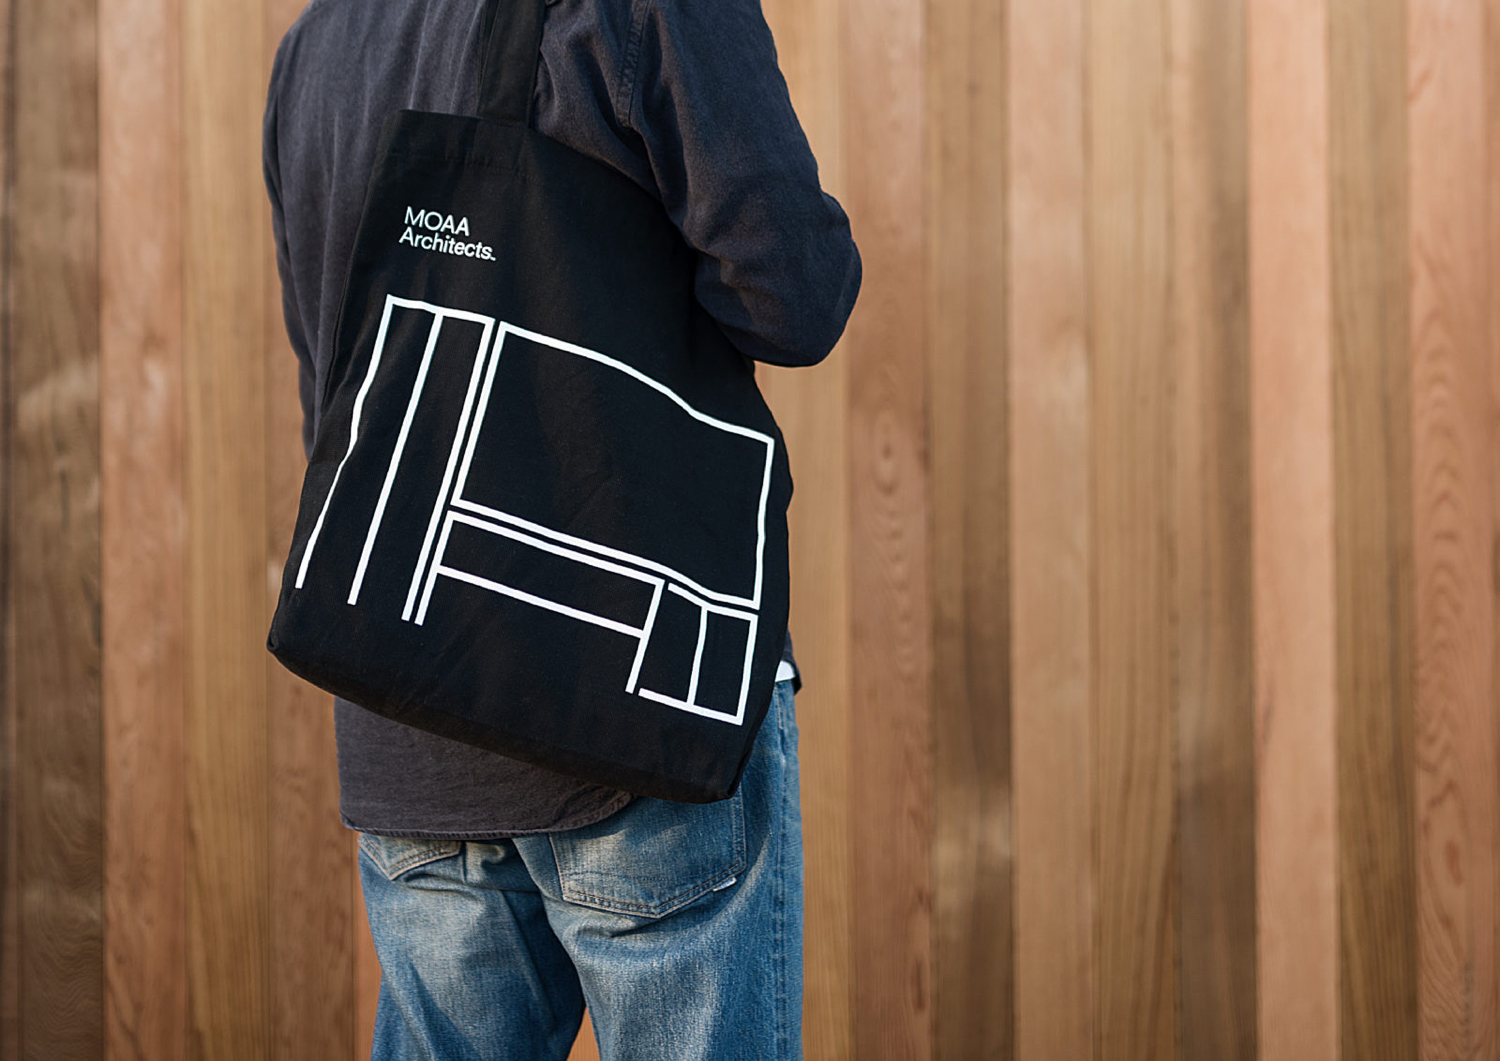 Logo, stationery, business cards, signage and tote bag by In-house for New Zealand's MOAA Architects